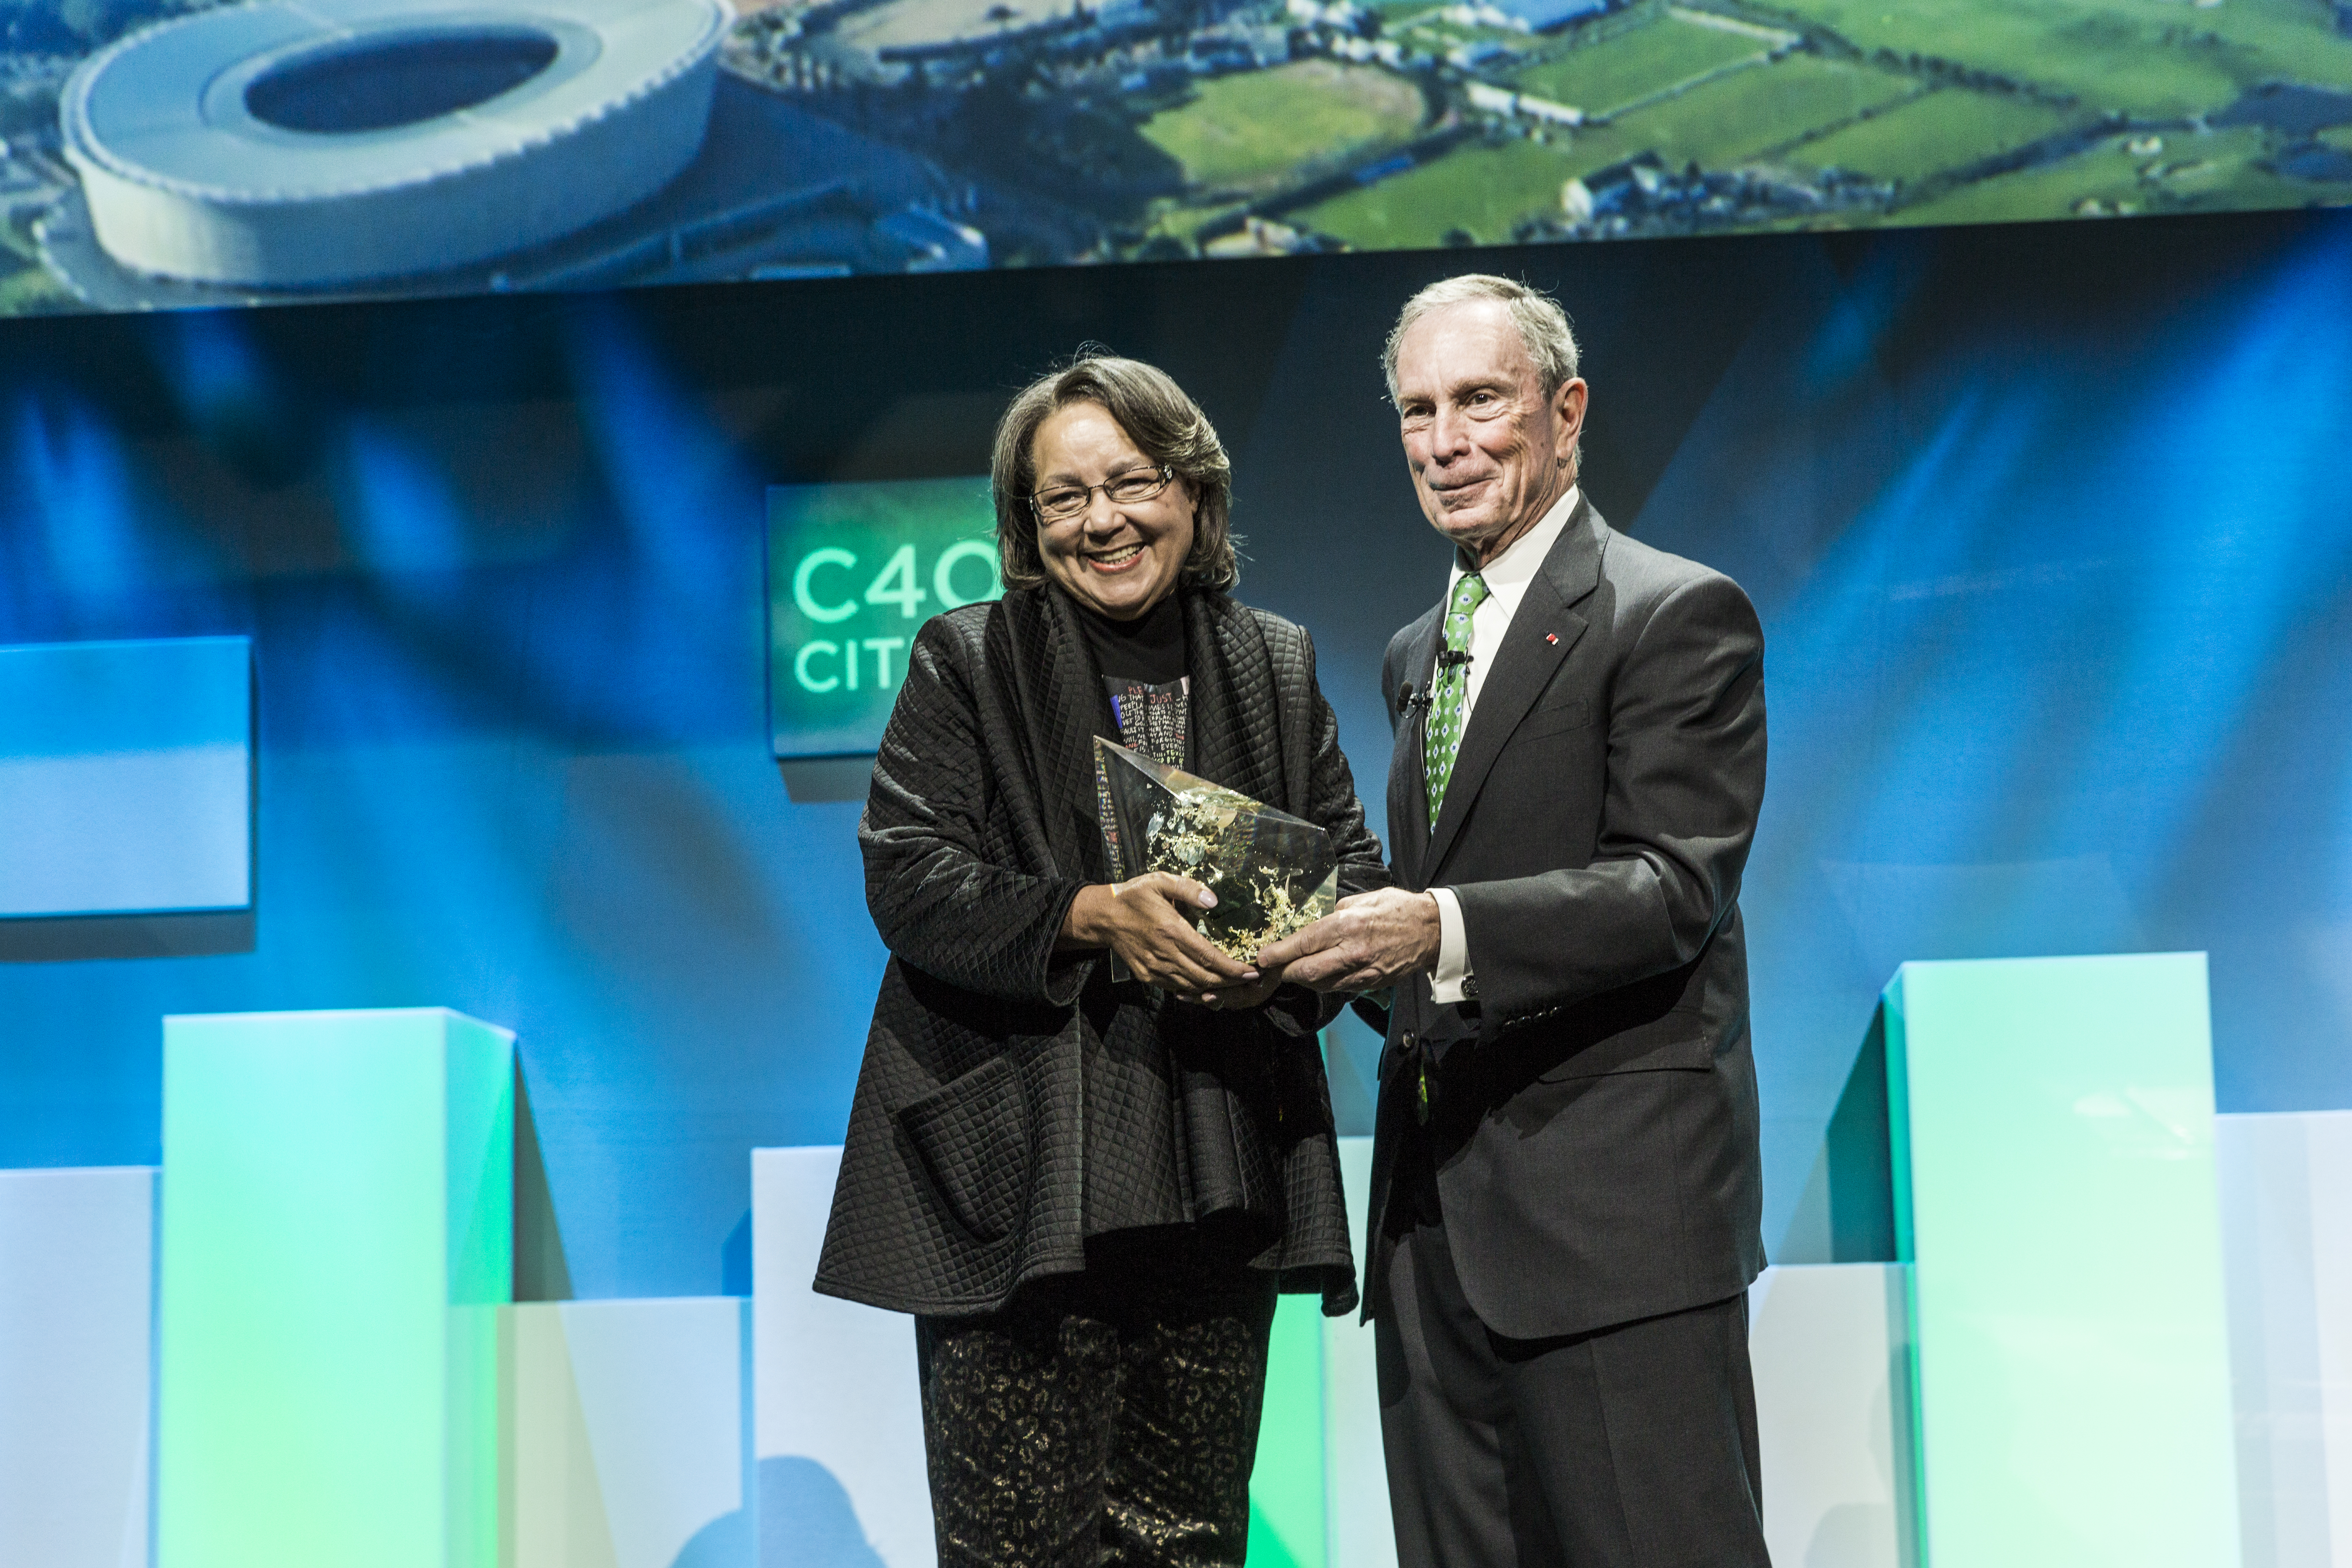 Cape Town was one of 10 winners of the C40 awards held in Paris during COP21 for its Water Conservation and Demand Management (WCWDM) Programme